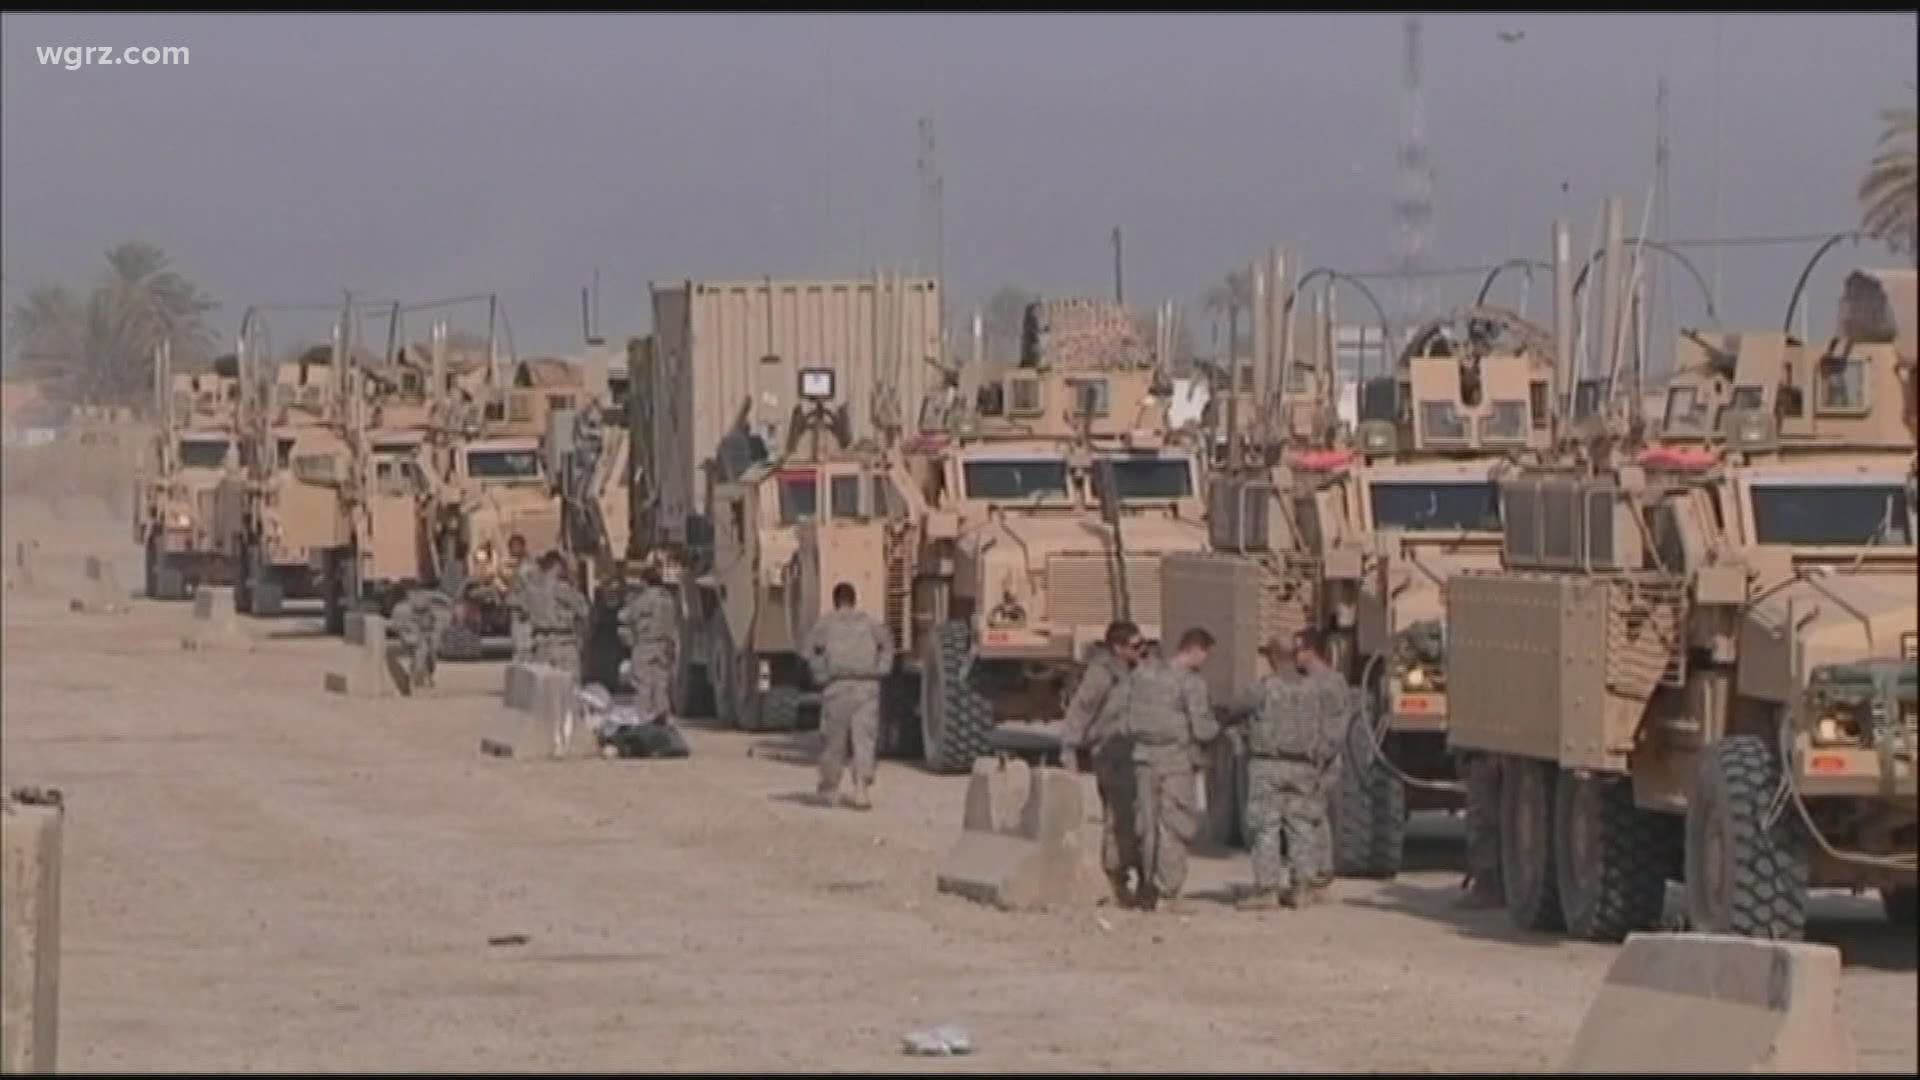 U.S. forces in Iraq will be reduced as the Iraqi capability to defeat and prevent ISIS continues to improve.